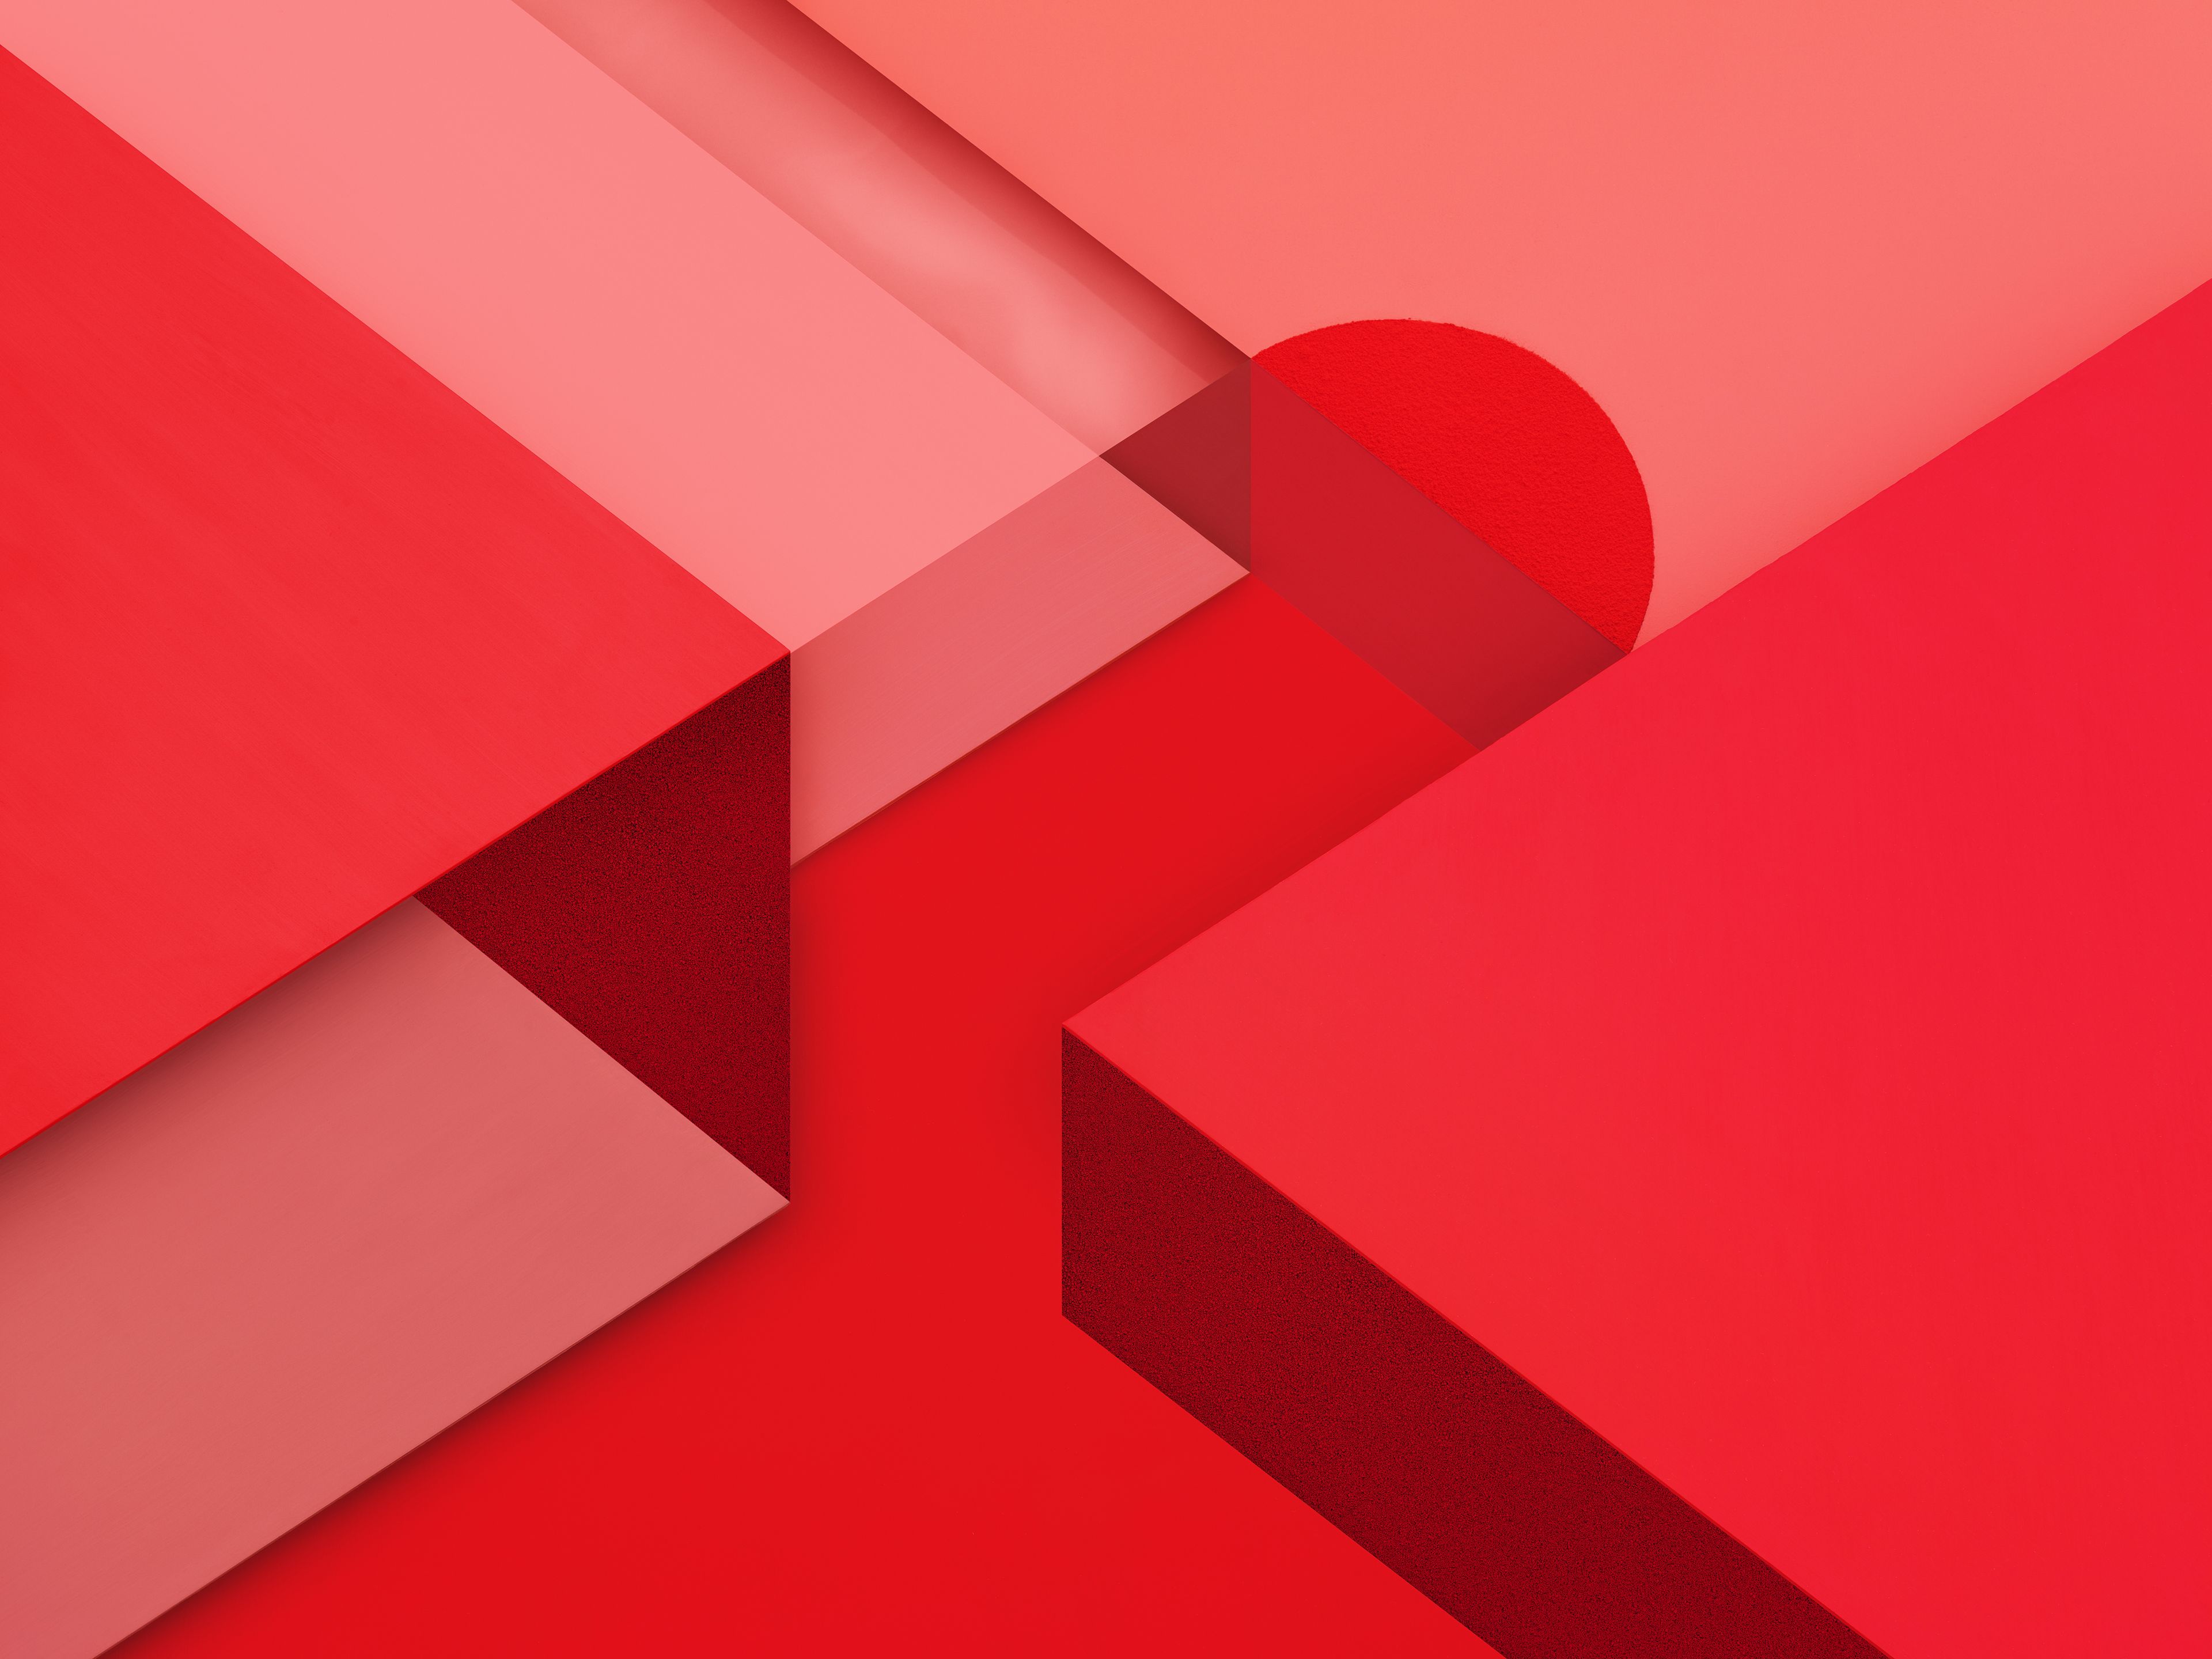 Here's how Google made the stock wallpapers in Android 6.0 Marshmallow